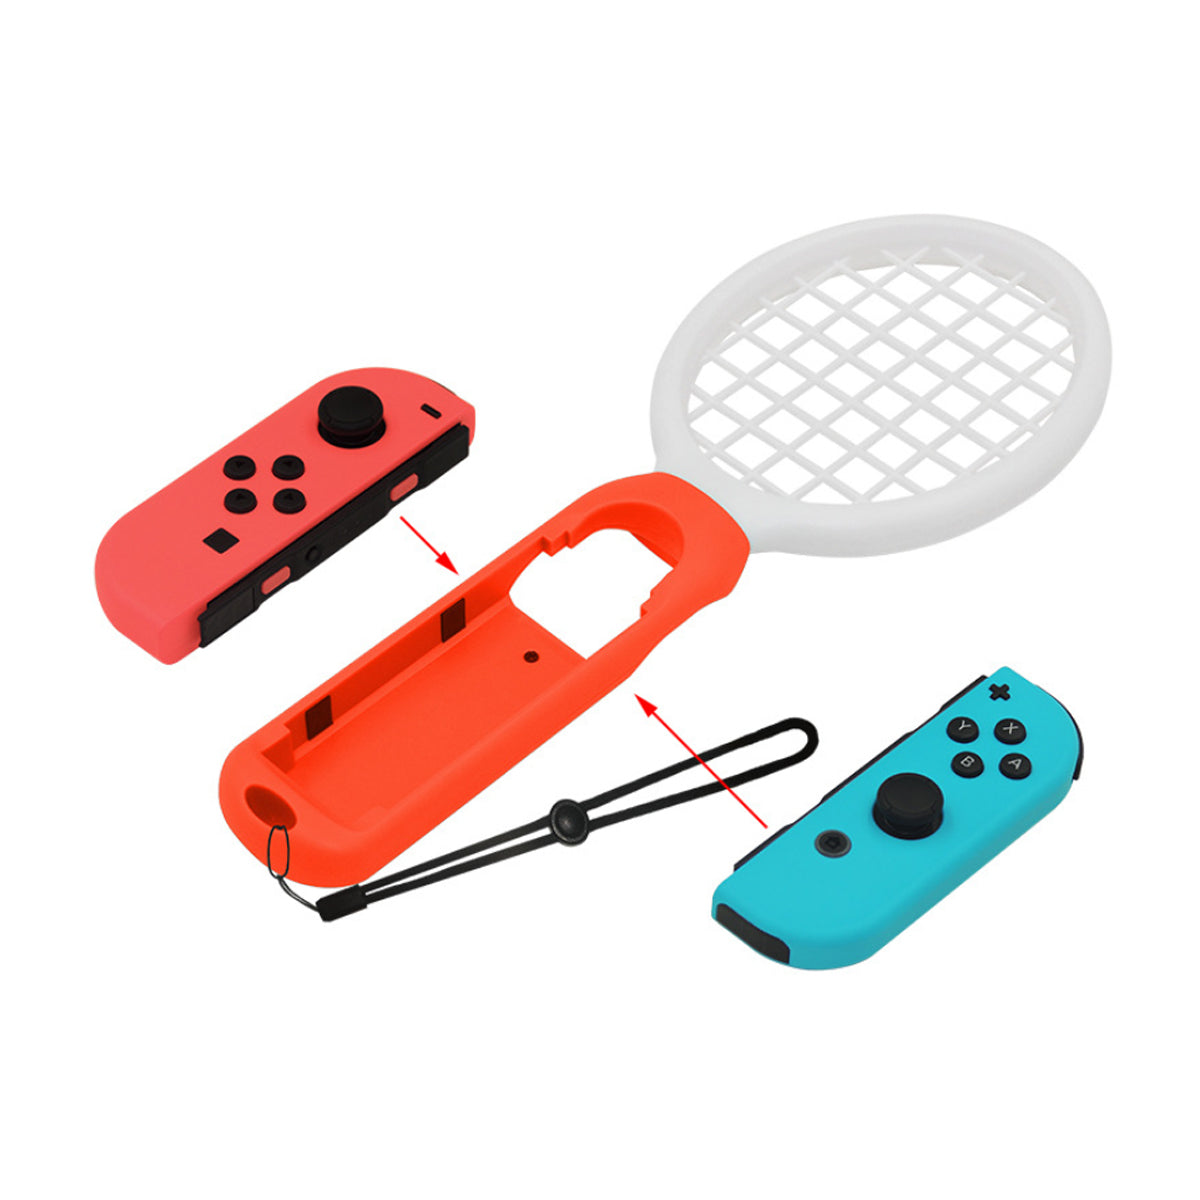 Real Rackets Switch Game Accessory Twin Set by VistaShops